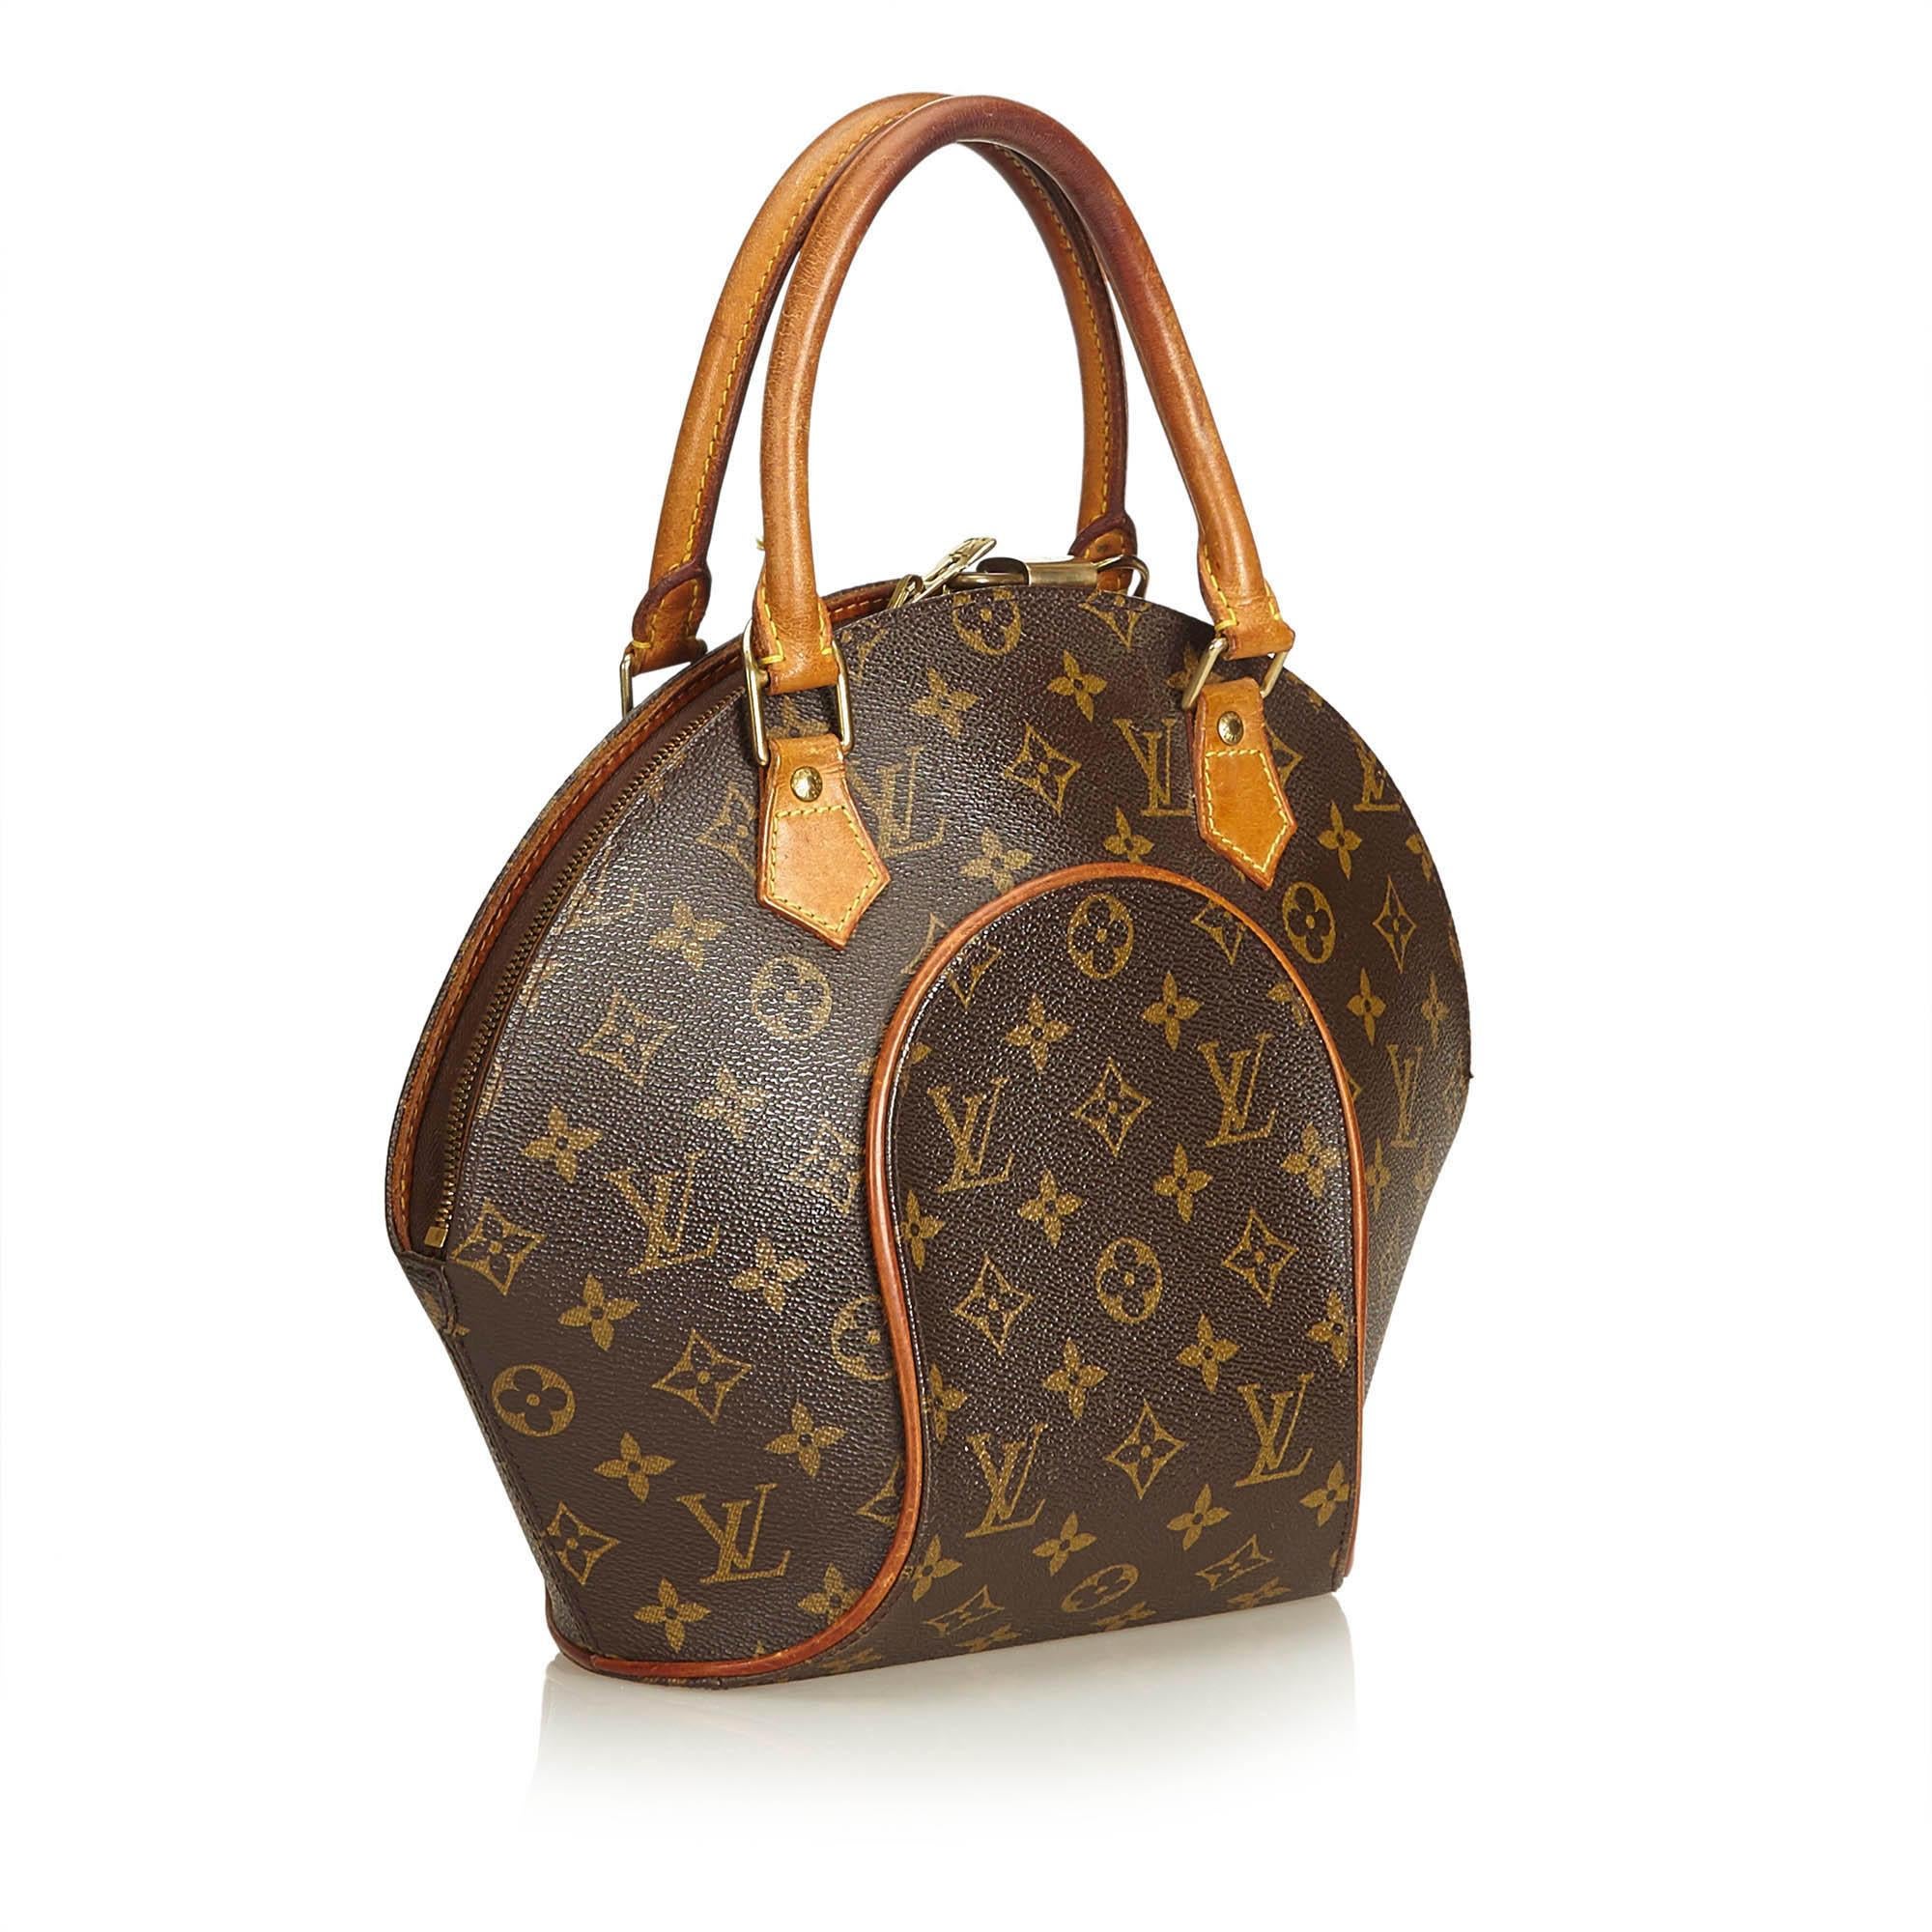 The Ellipse MM features rolled vachetta handles, the Monogram canvas, vachetta trim, a top zip closure, an interior flat pocket, and a D-ring. It carries as B condition rating.

Inclusions: 
Padlock


Louis Vuitton pieces do not come with an